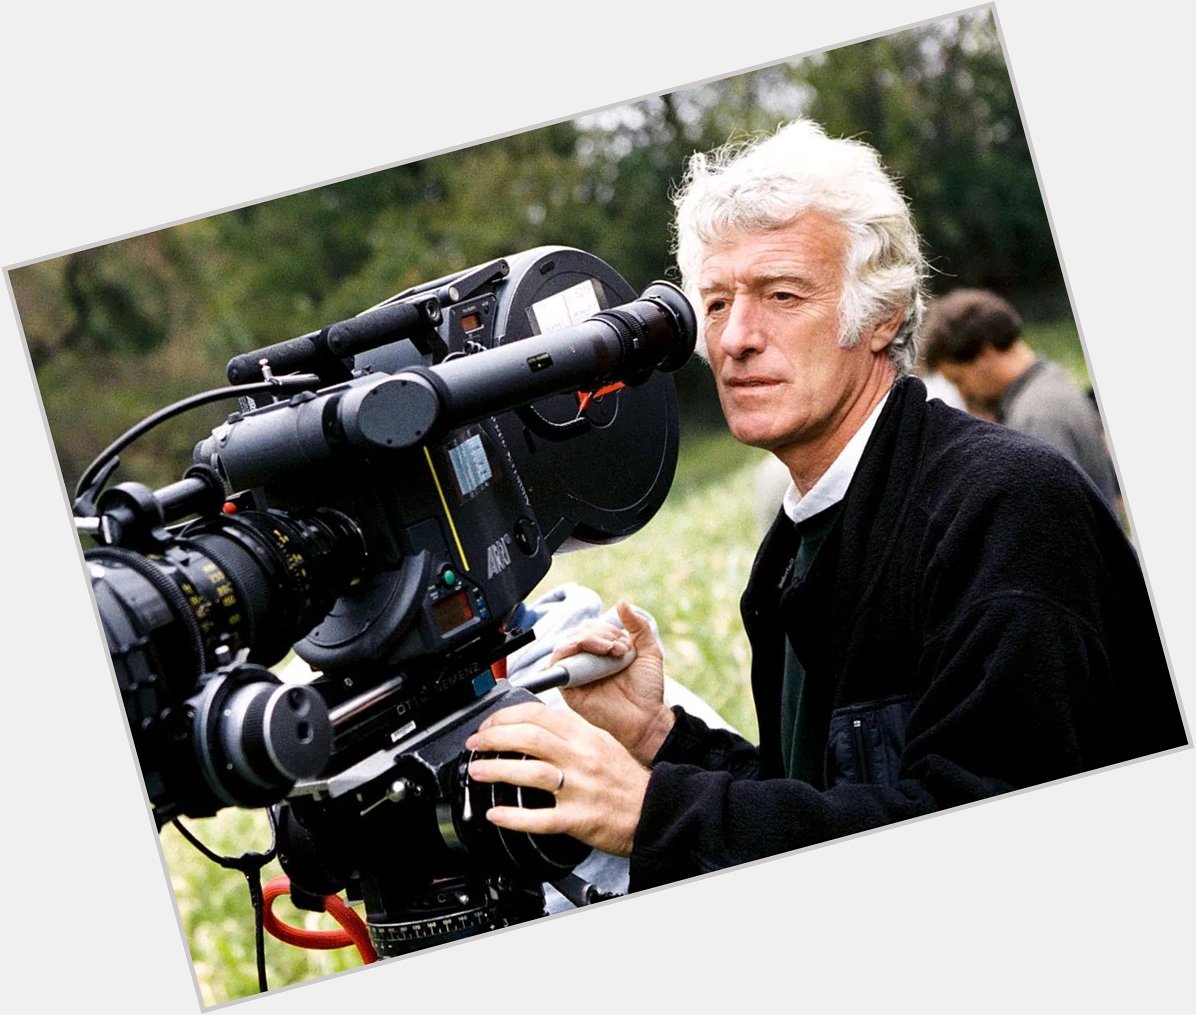 Happy Birthday to the legendary 
Roger Deakins! Your mastery in visual language is something I strive for  